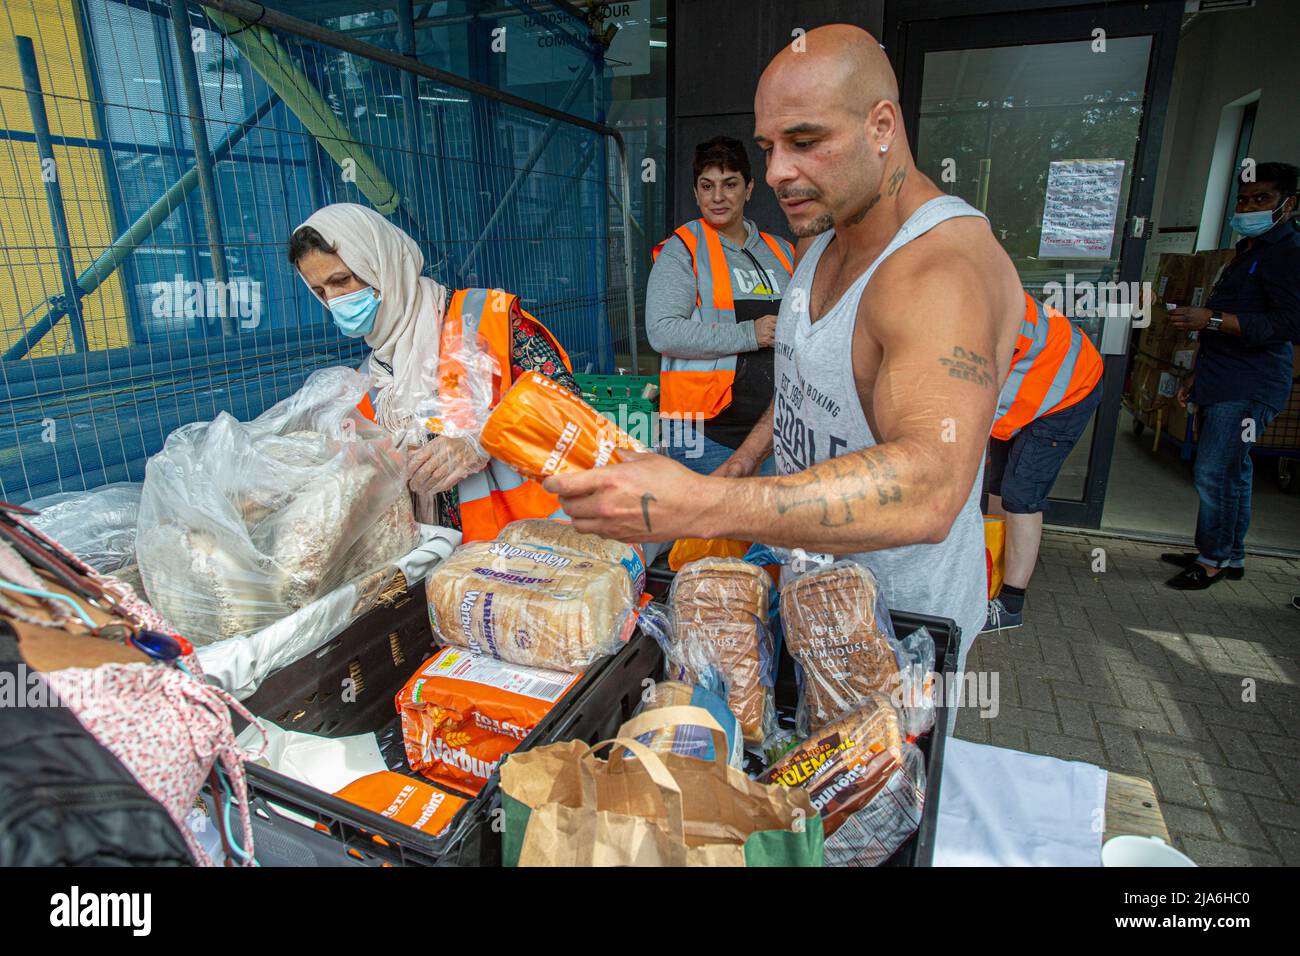 Male  collecting food from local food bank in South-west London  , England Stock Photo